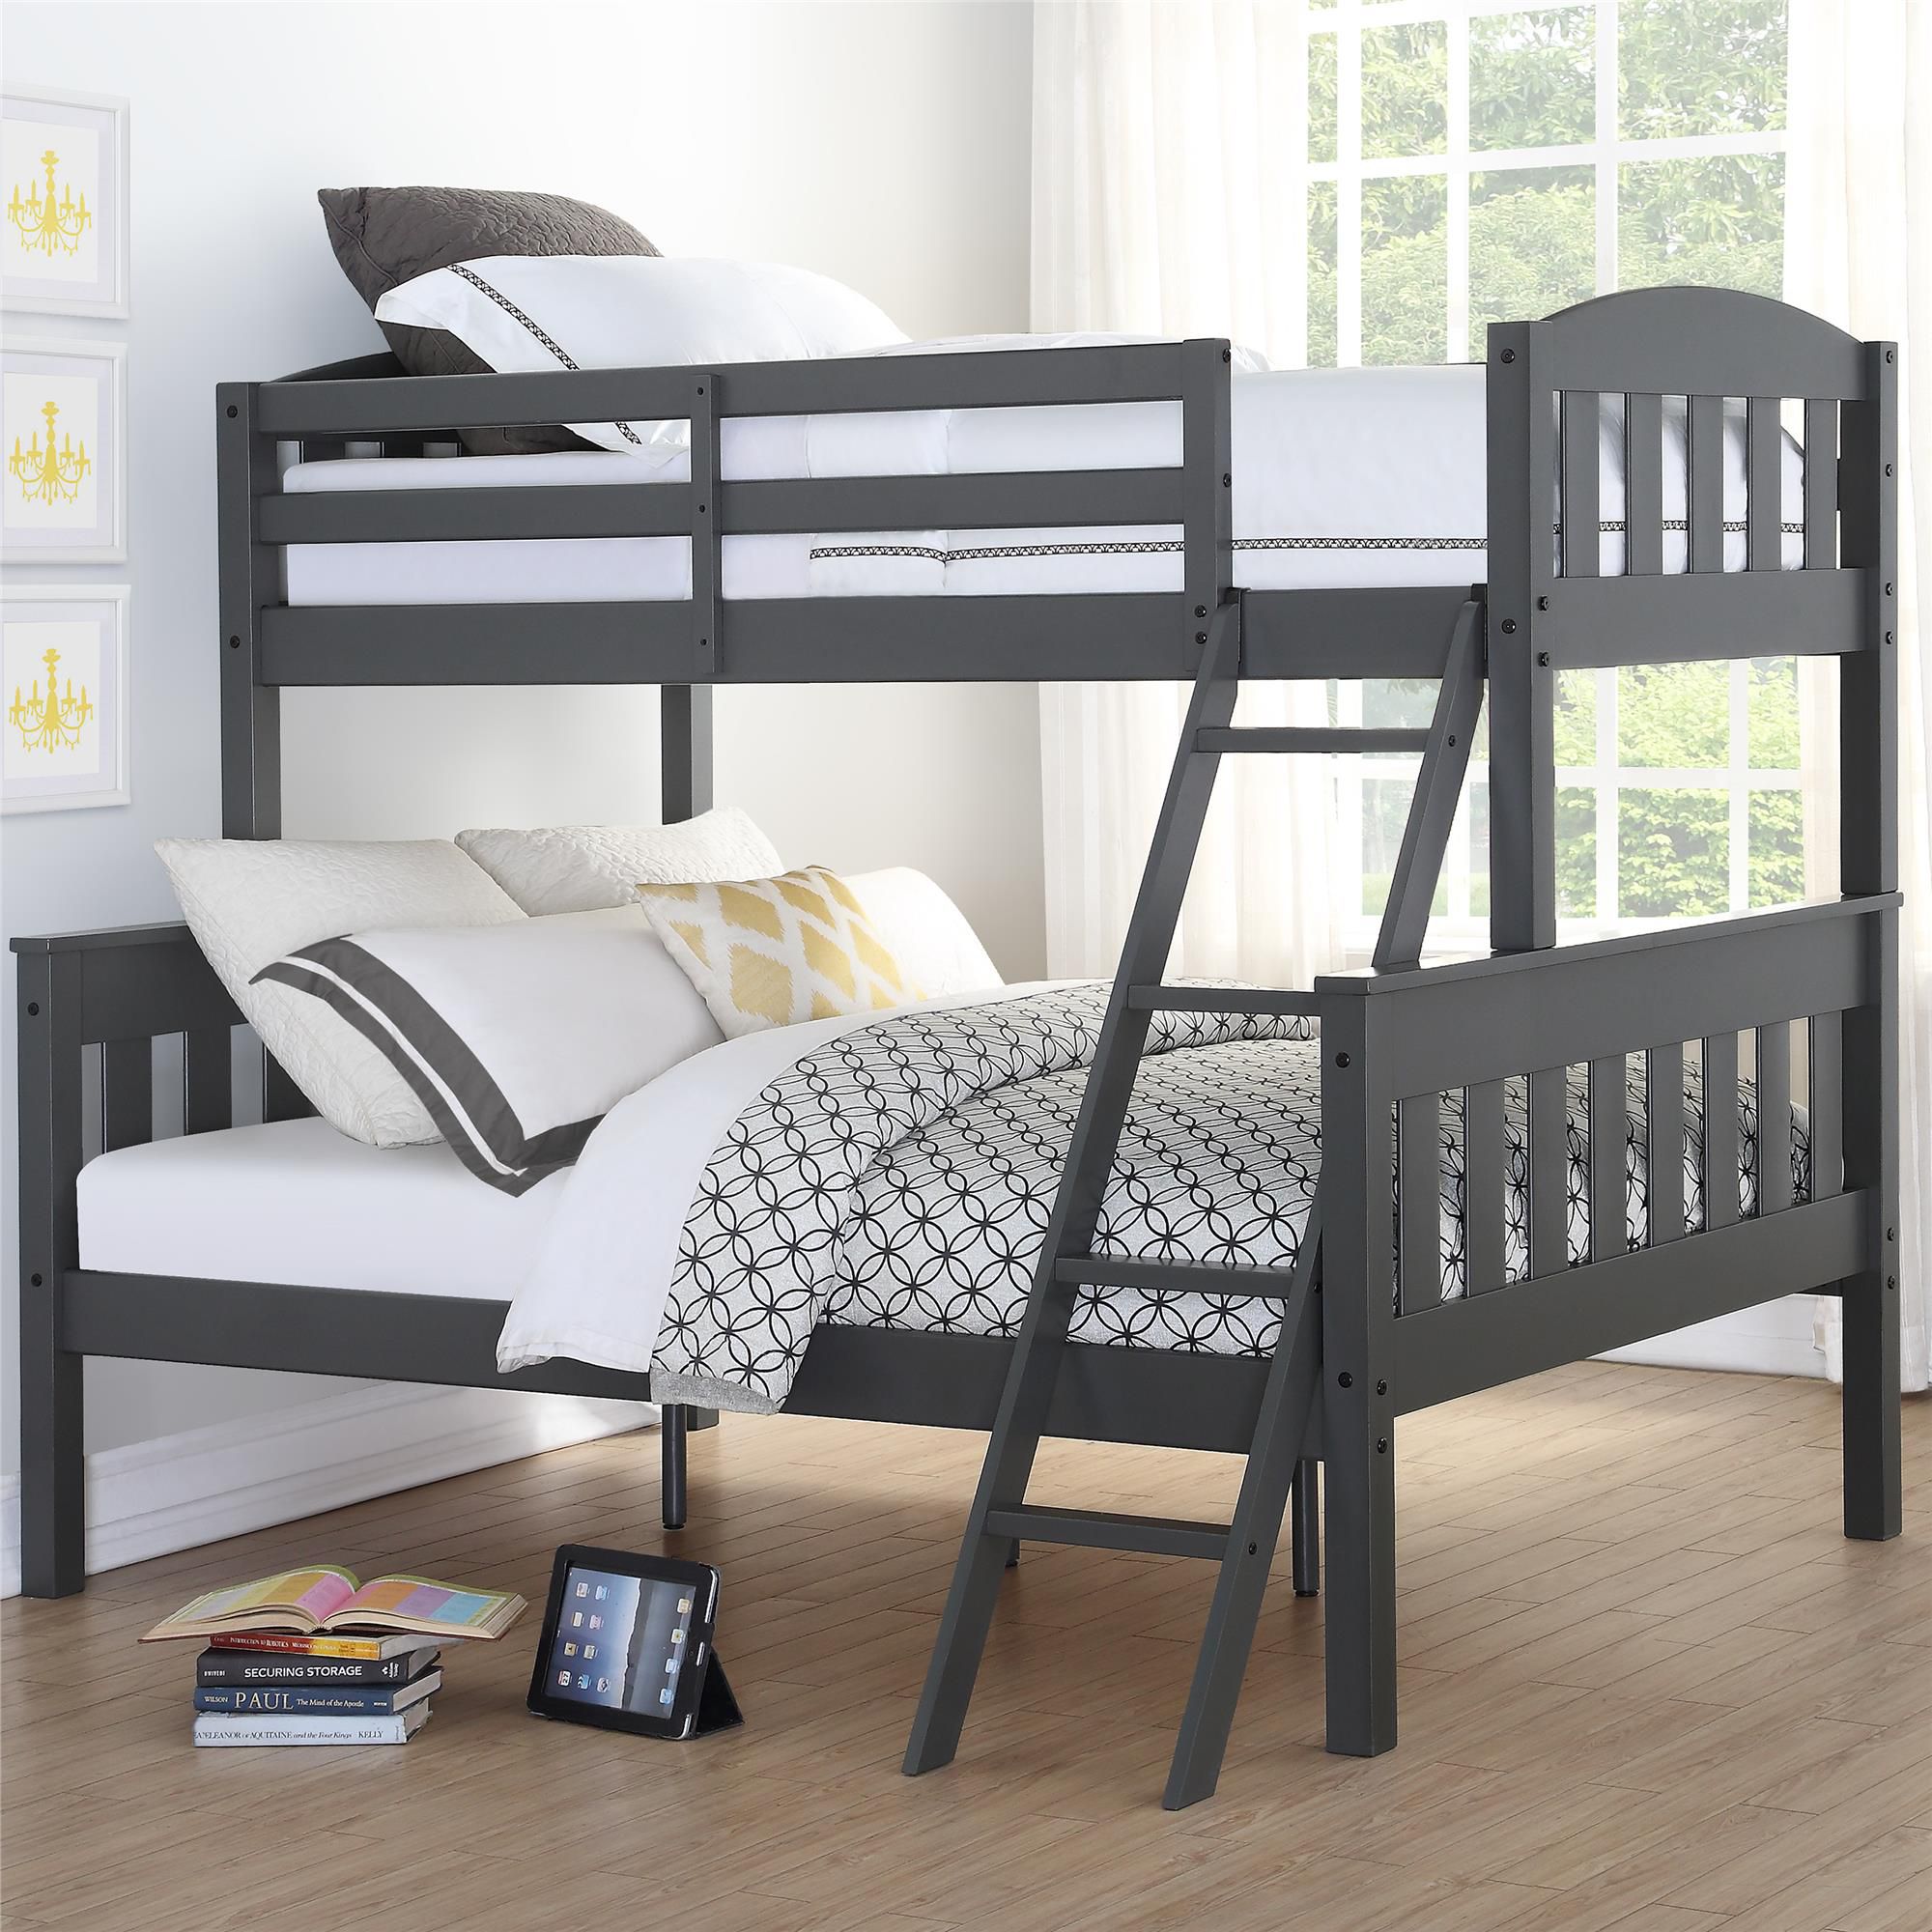 Dorel Living Airlie Twin Over Full Bunk Bed, Dorel Twin Over Full Bunk Bed Instructions